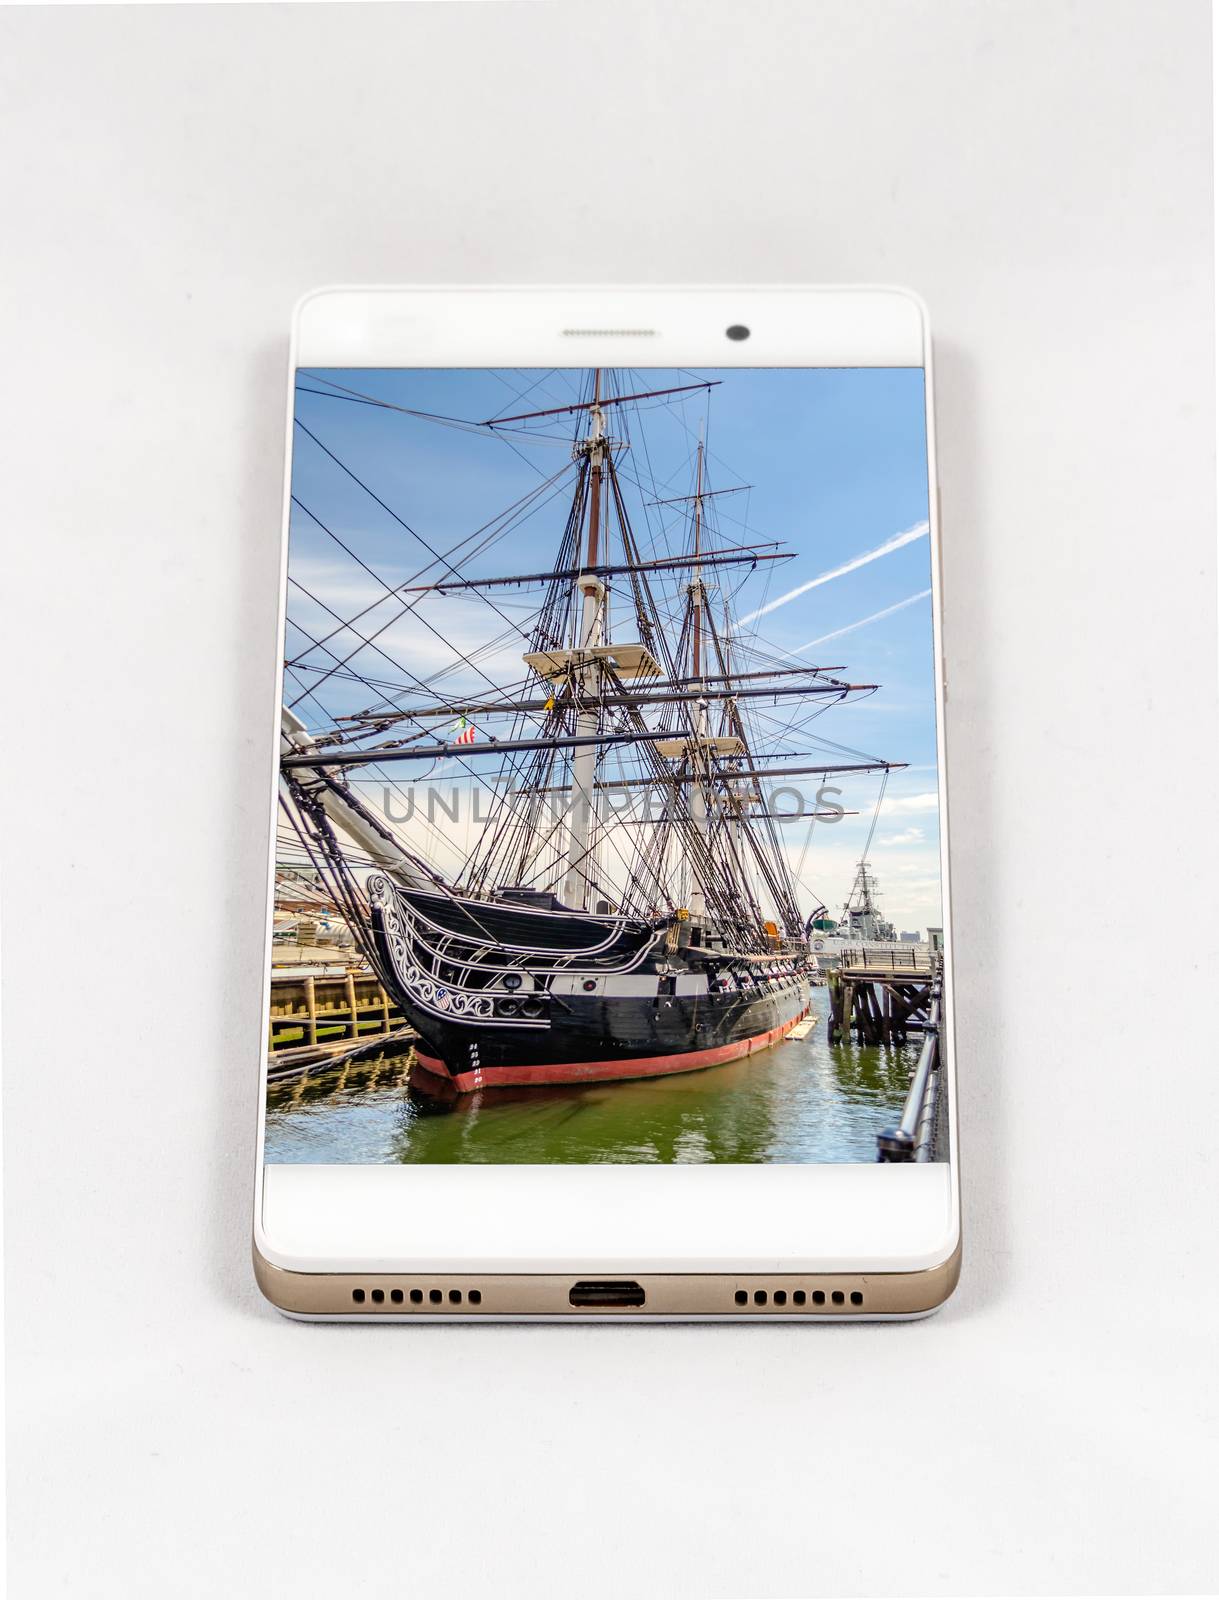 Modern smartphone displaying picture of USS Constitution frigate by marcorubino